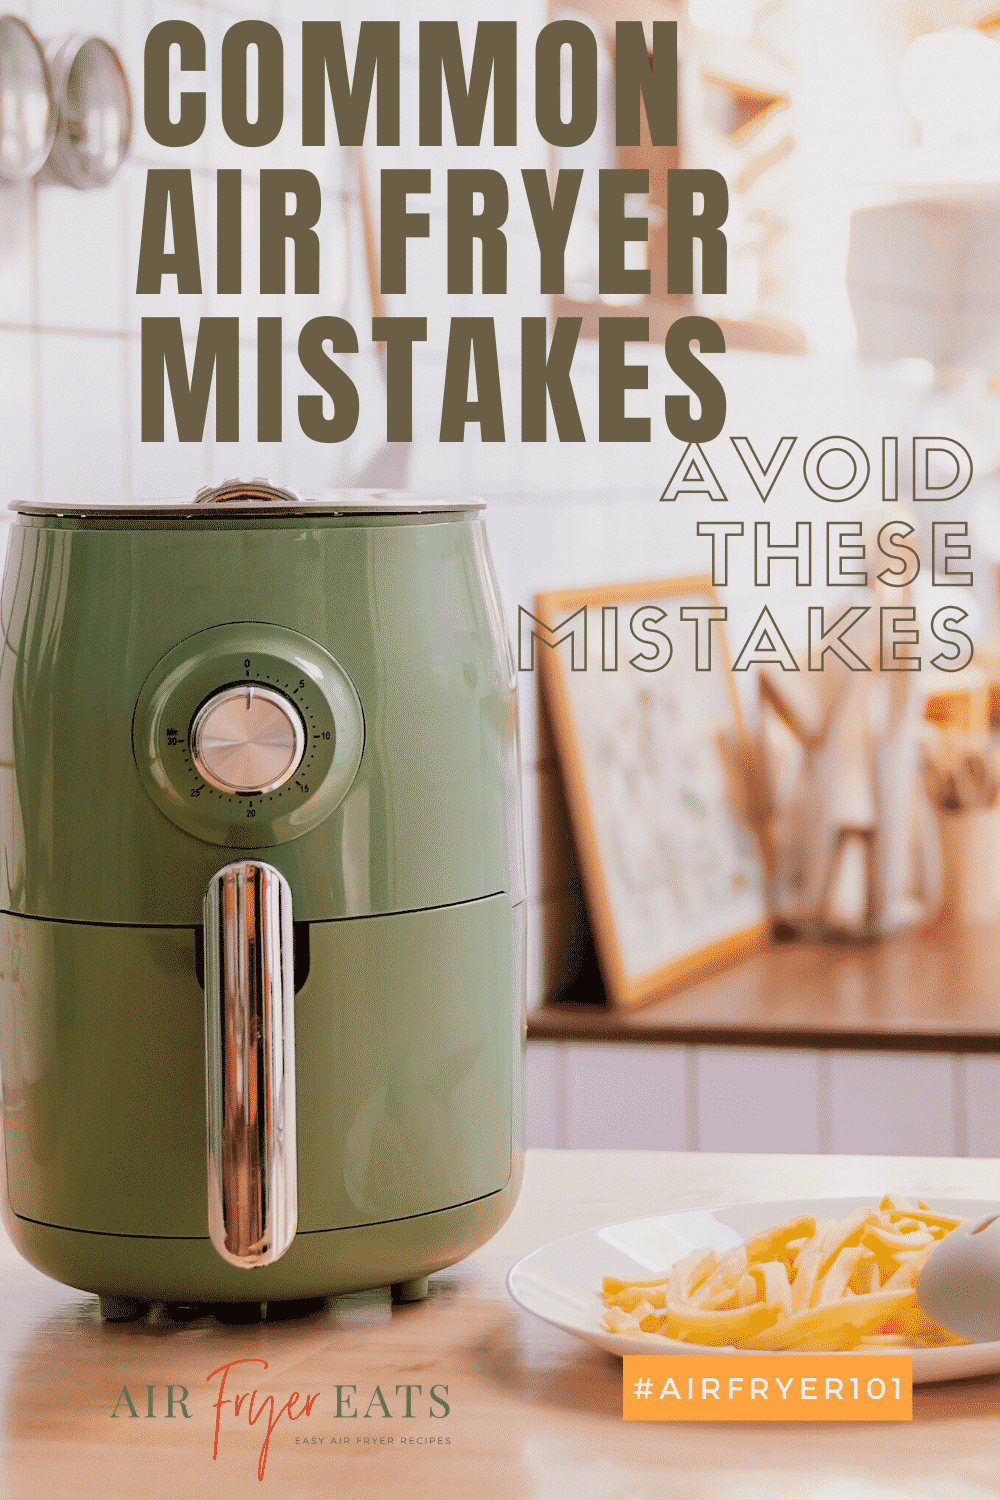 There are air fryer mistakes you could be making. Here are some ways you might be using your air fryer wrong and some delicious air fryer recipes to make things right! See which of these Common Air Fryer Mistakes you might be making. #airfryermistakes #airfryer via @vegetarianmamma